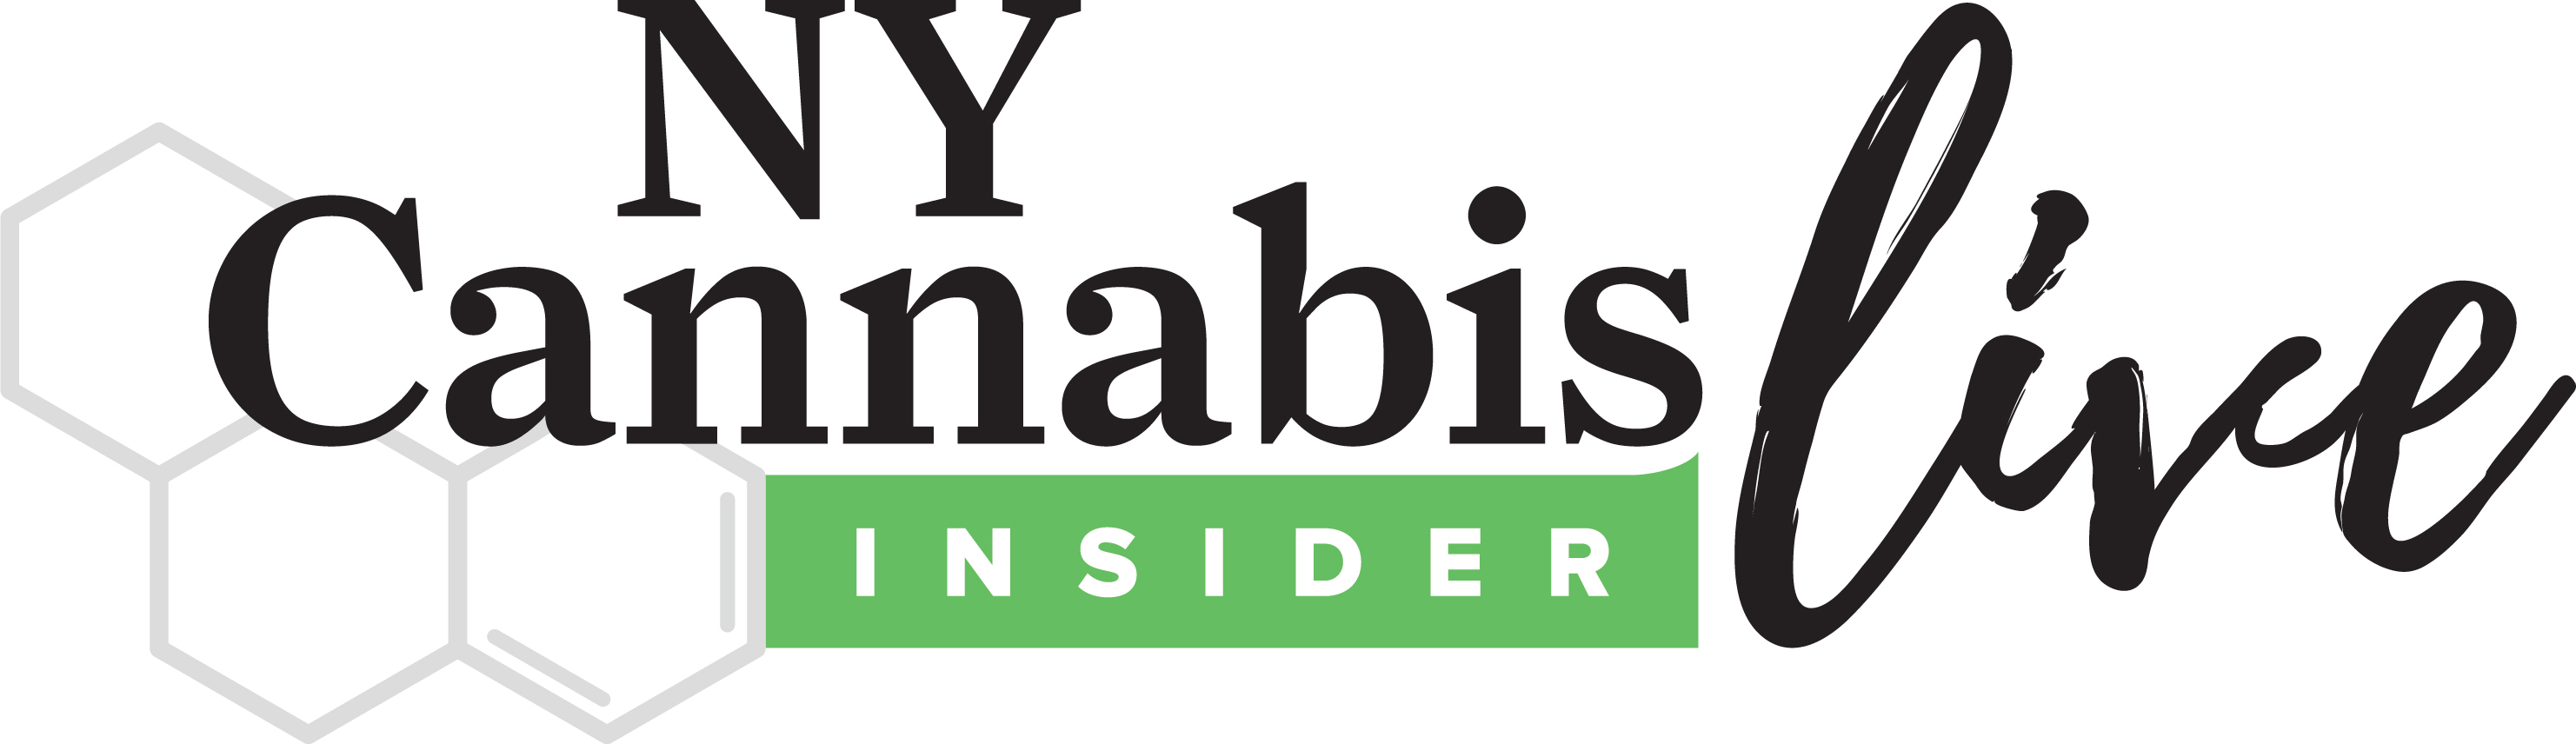 NY Cannabis Insider Live Conference